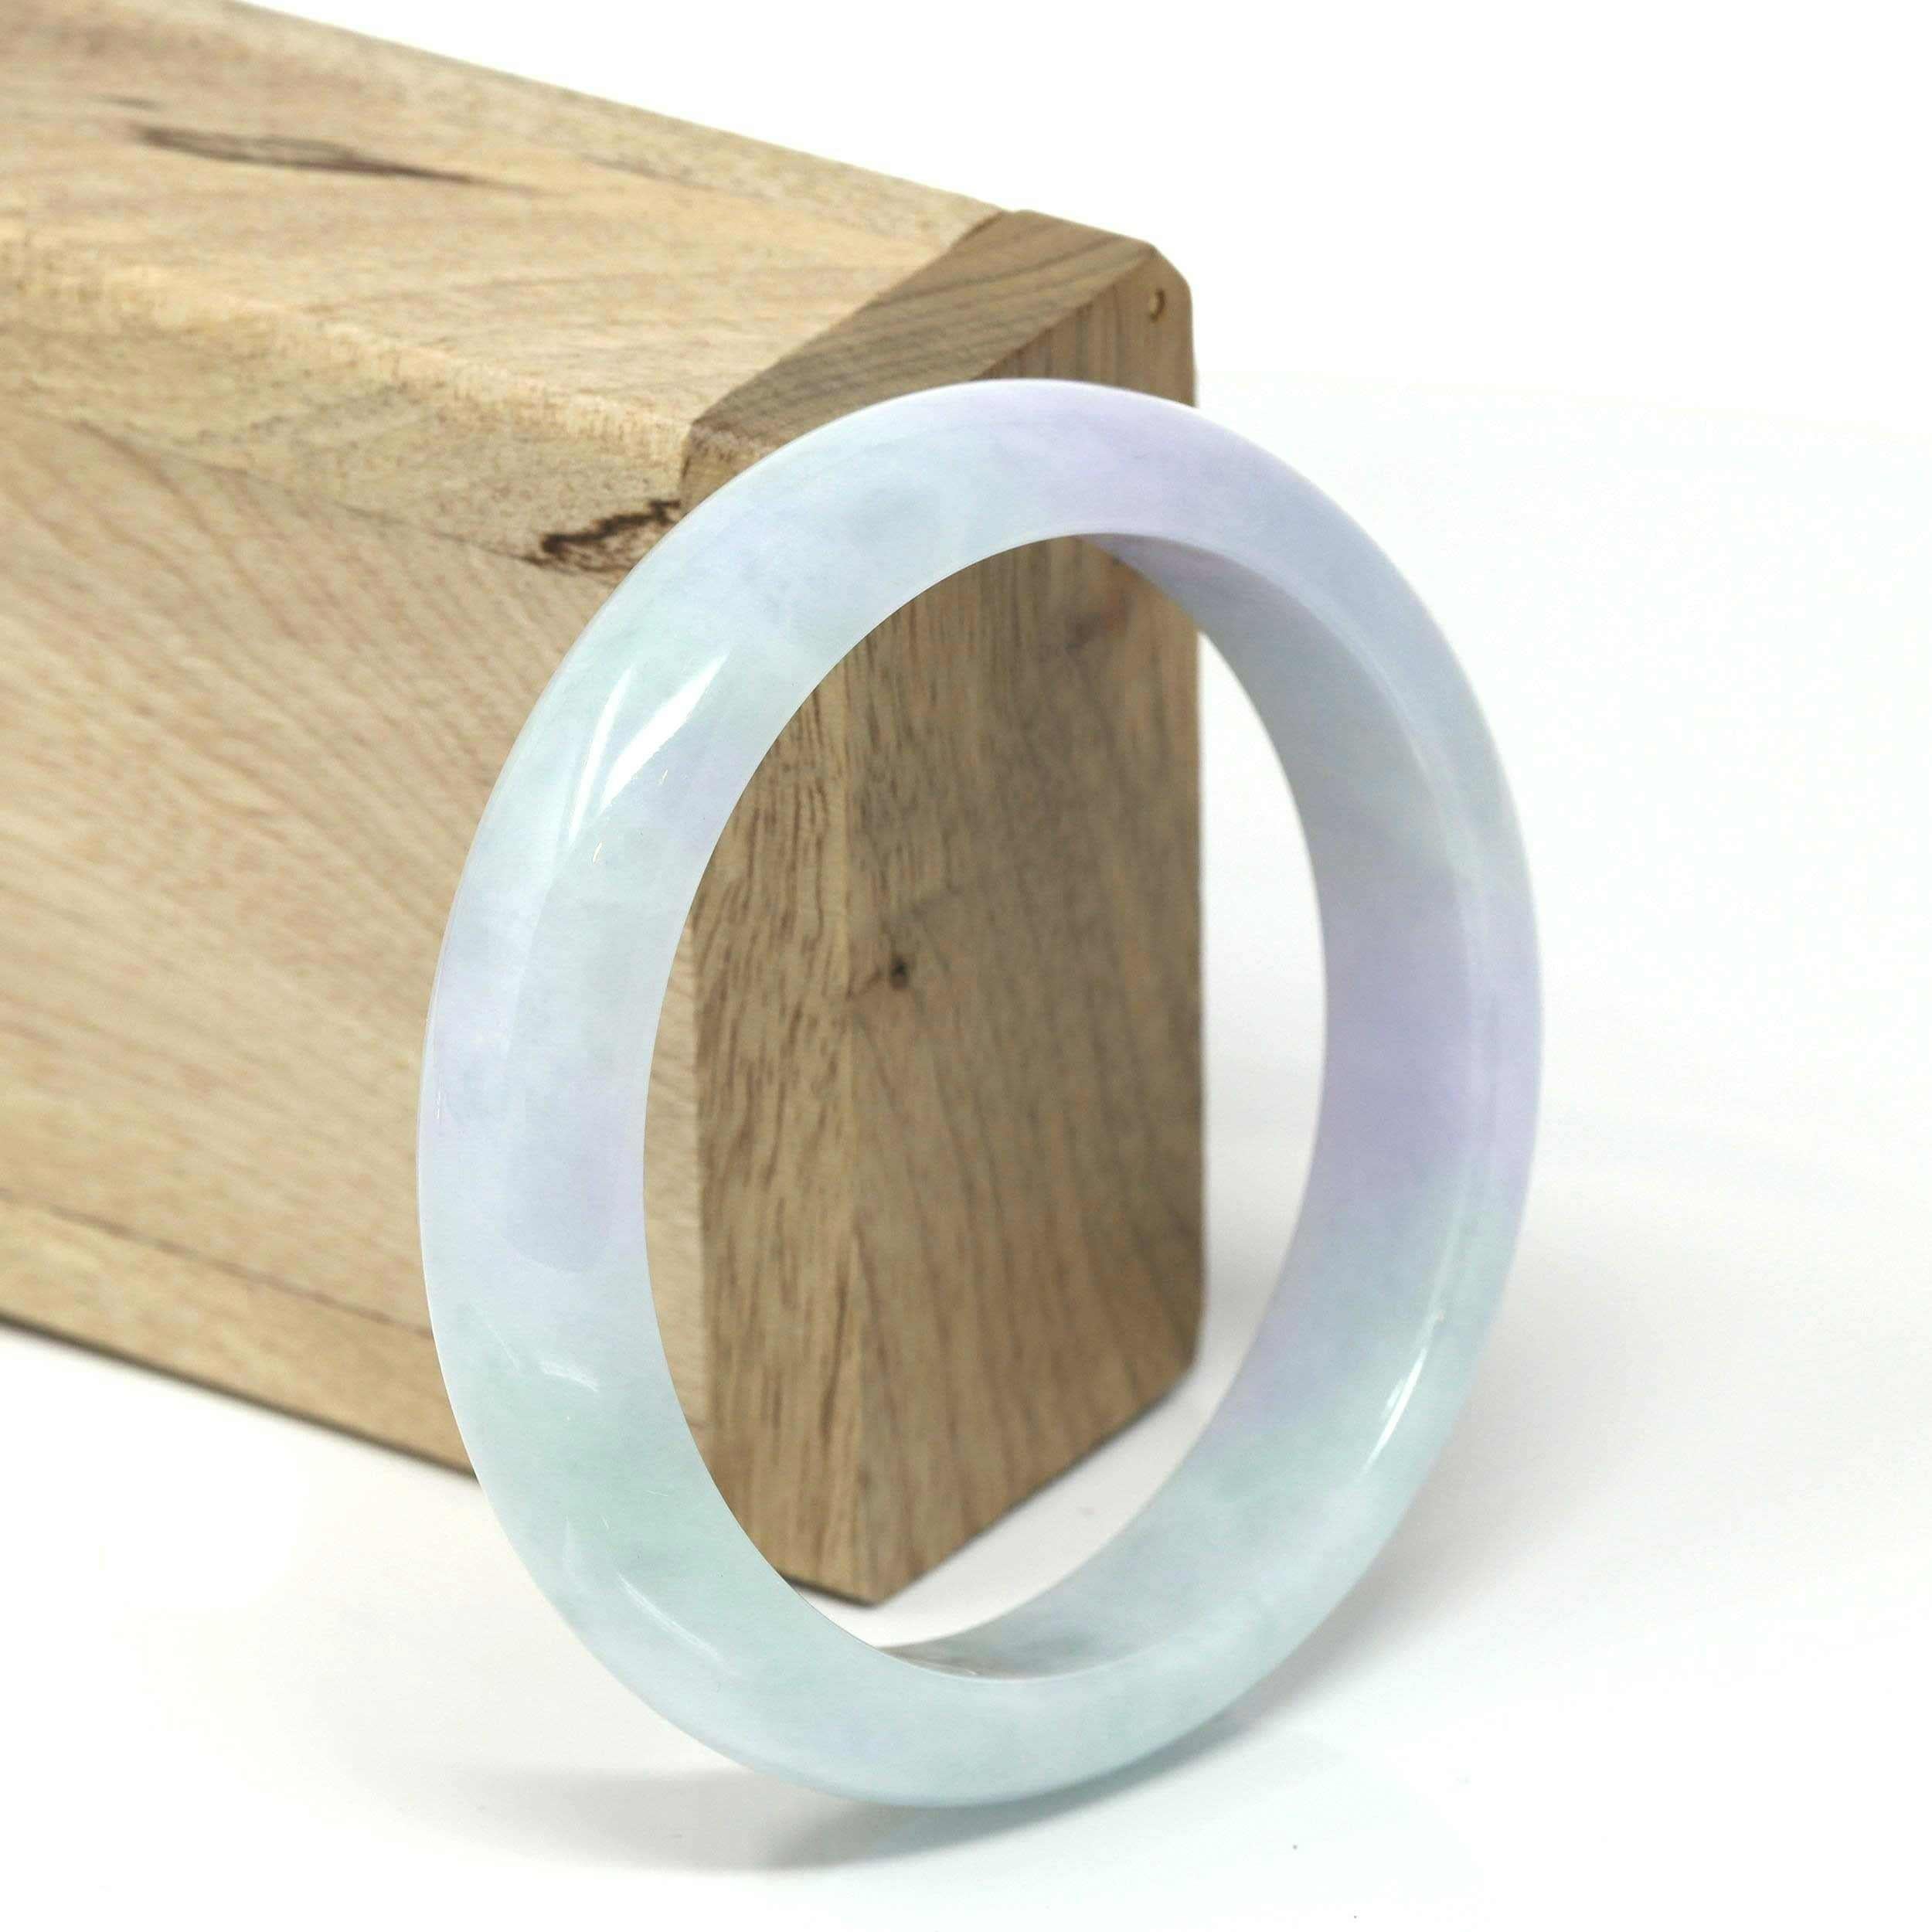  * DETAILS--- Genuine Burmese Jadeite Jade Bangle Bracelet. This bangle is made with high-quality genuine Burmese Jadeite jade. The jade texture is very good with an even light green color inside. The texture is smooth and translucent without any